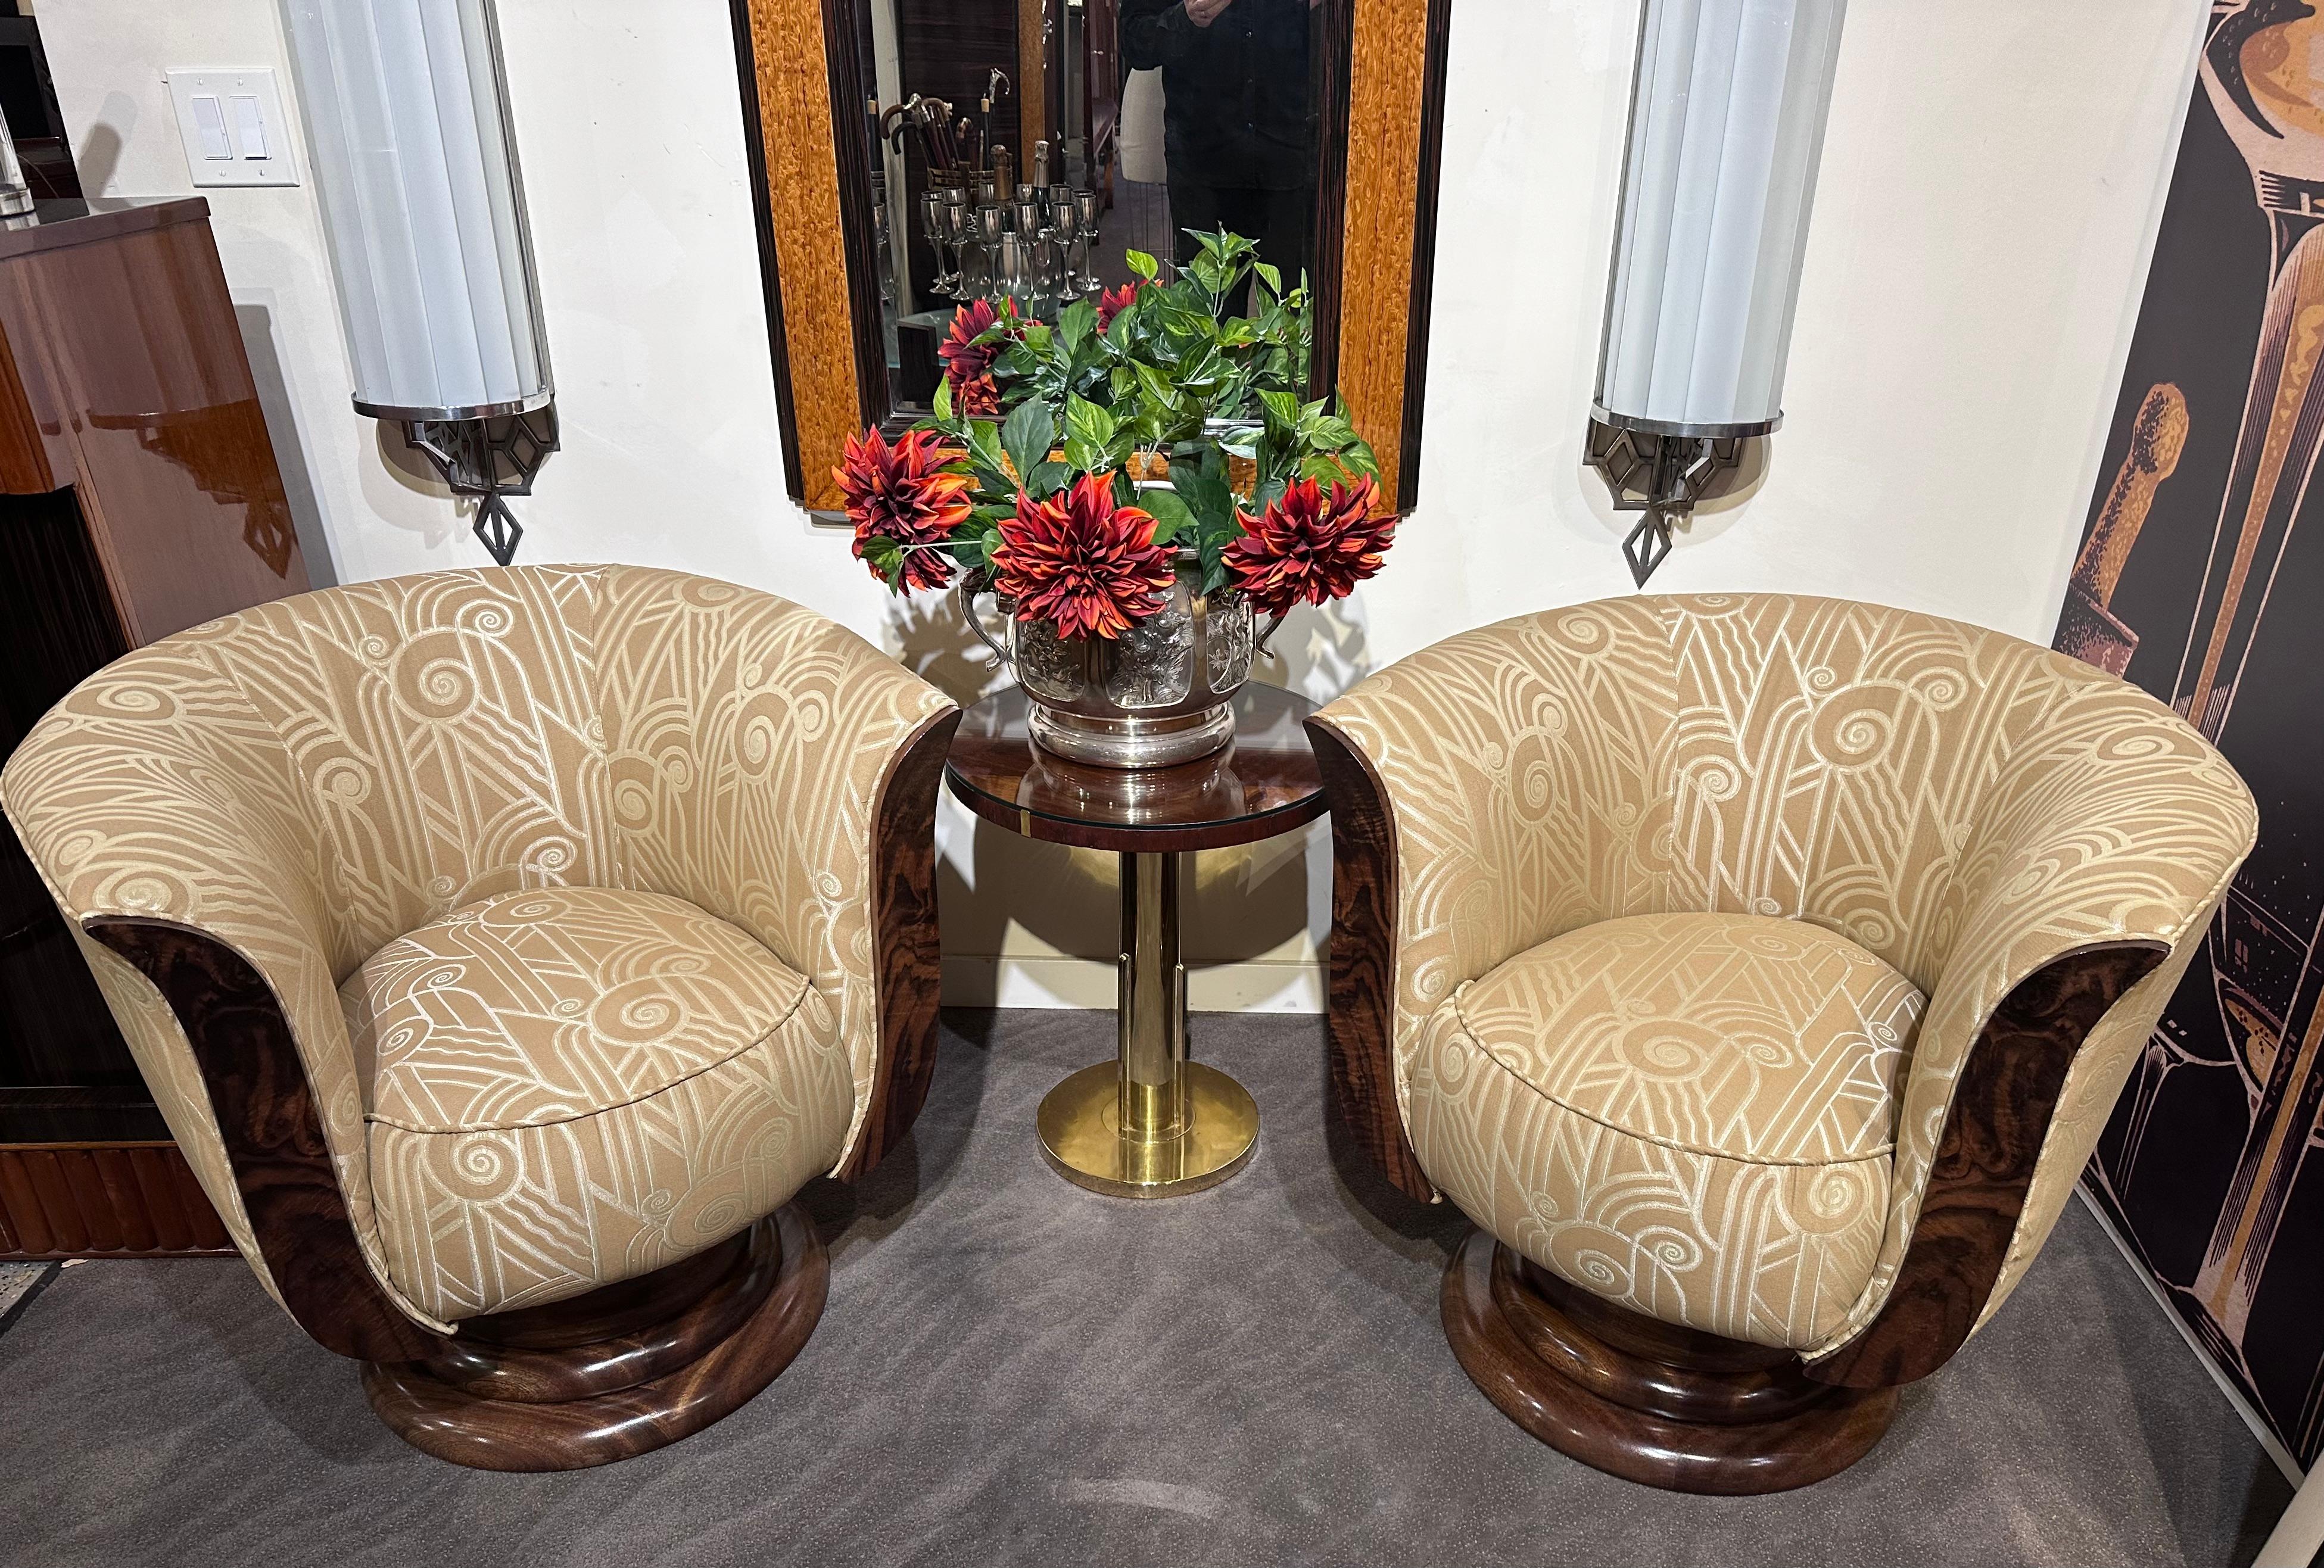 Our Art Deco Swivel Club Chairs are a design we’ve been championing for years. Sourced originally from France, these chairs are rumored to have originated from a hotel. We’ve enhanced them by adding a swivel base, significantly contributing to their